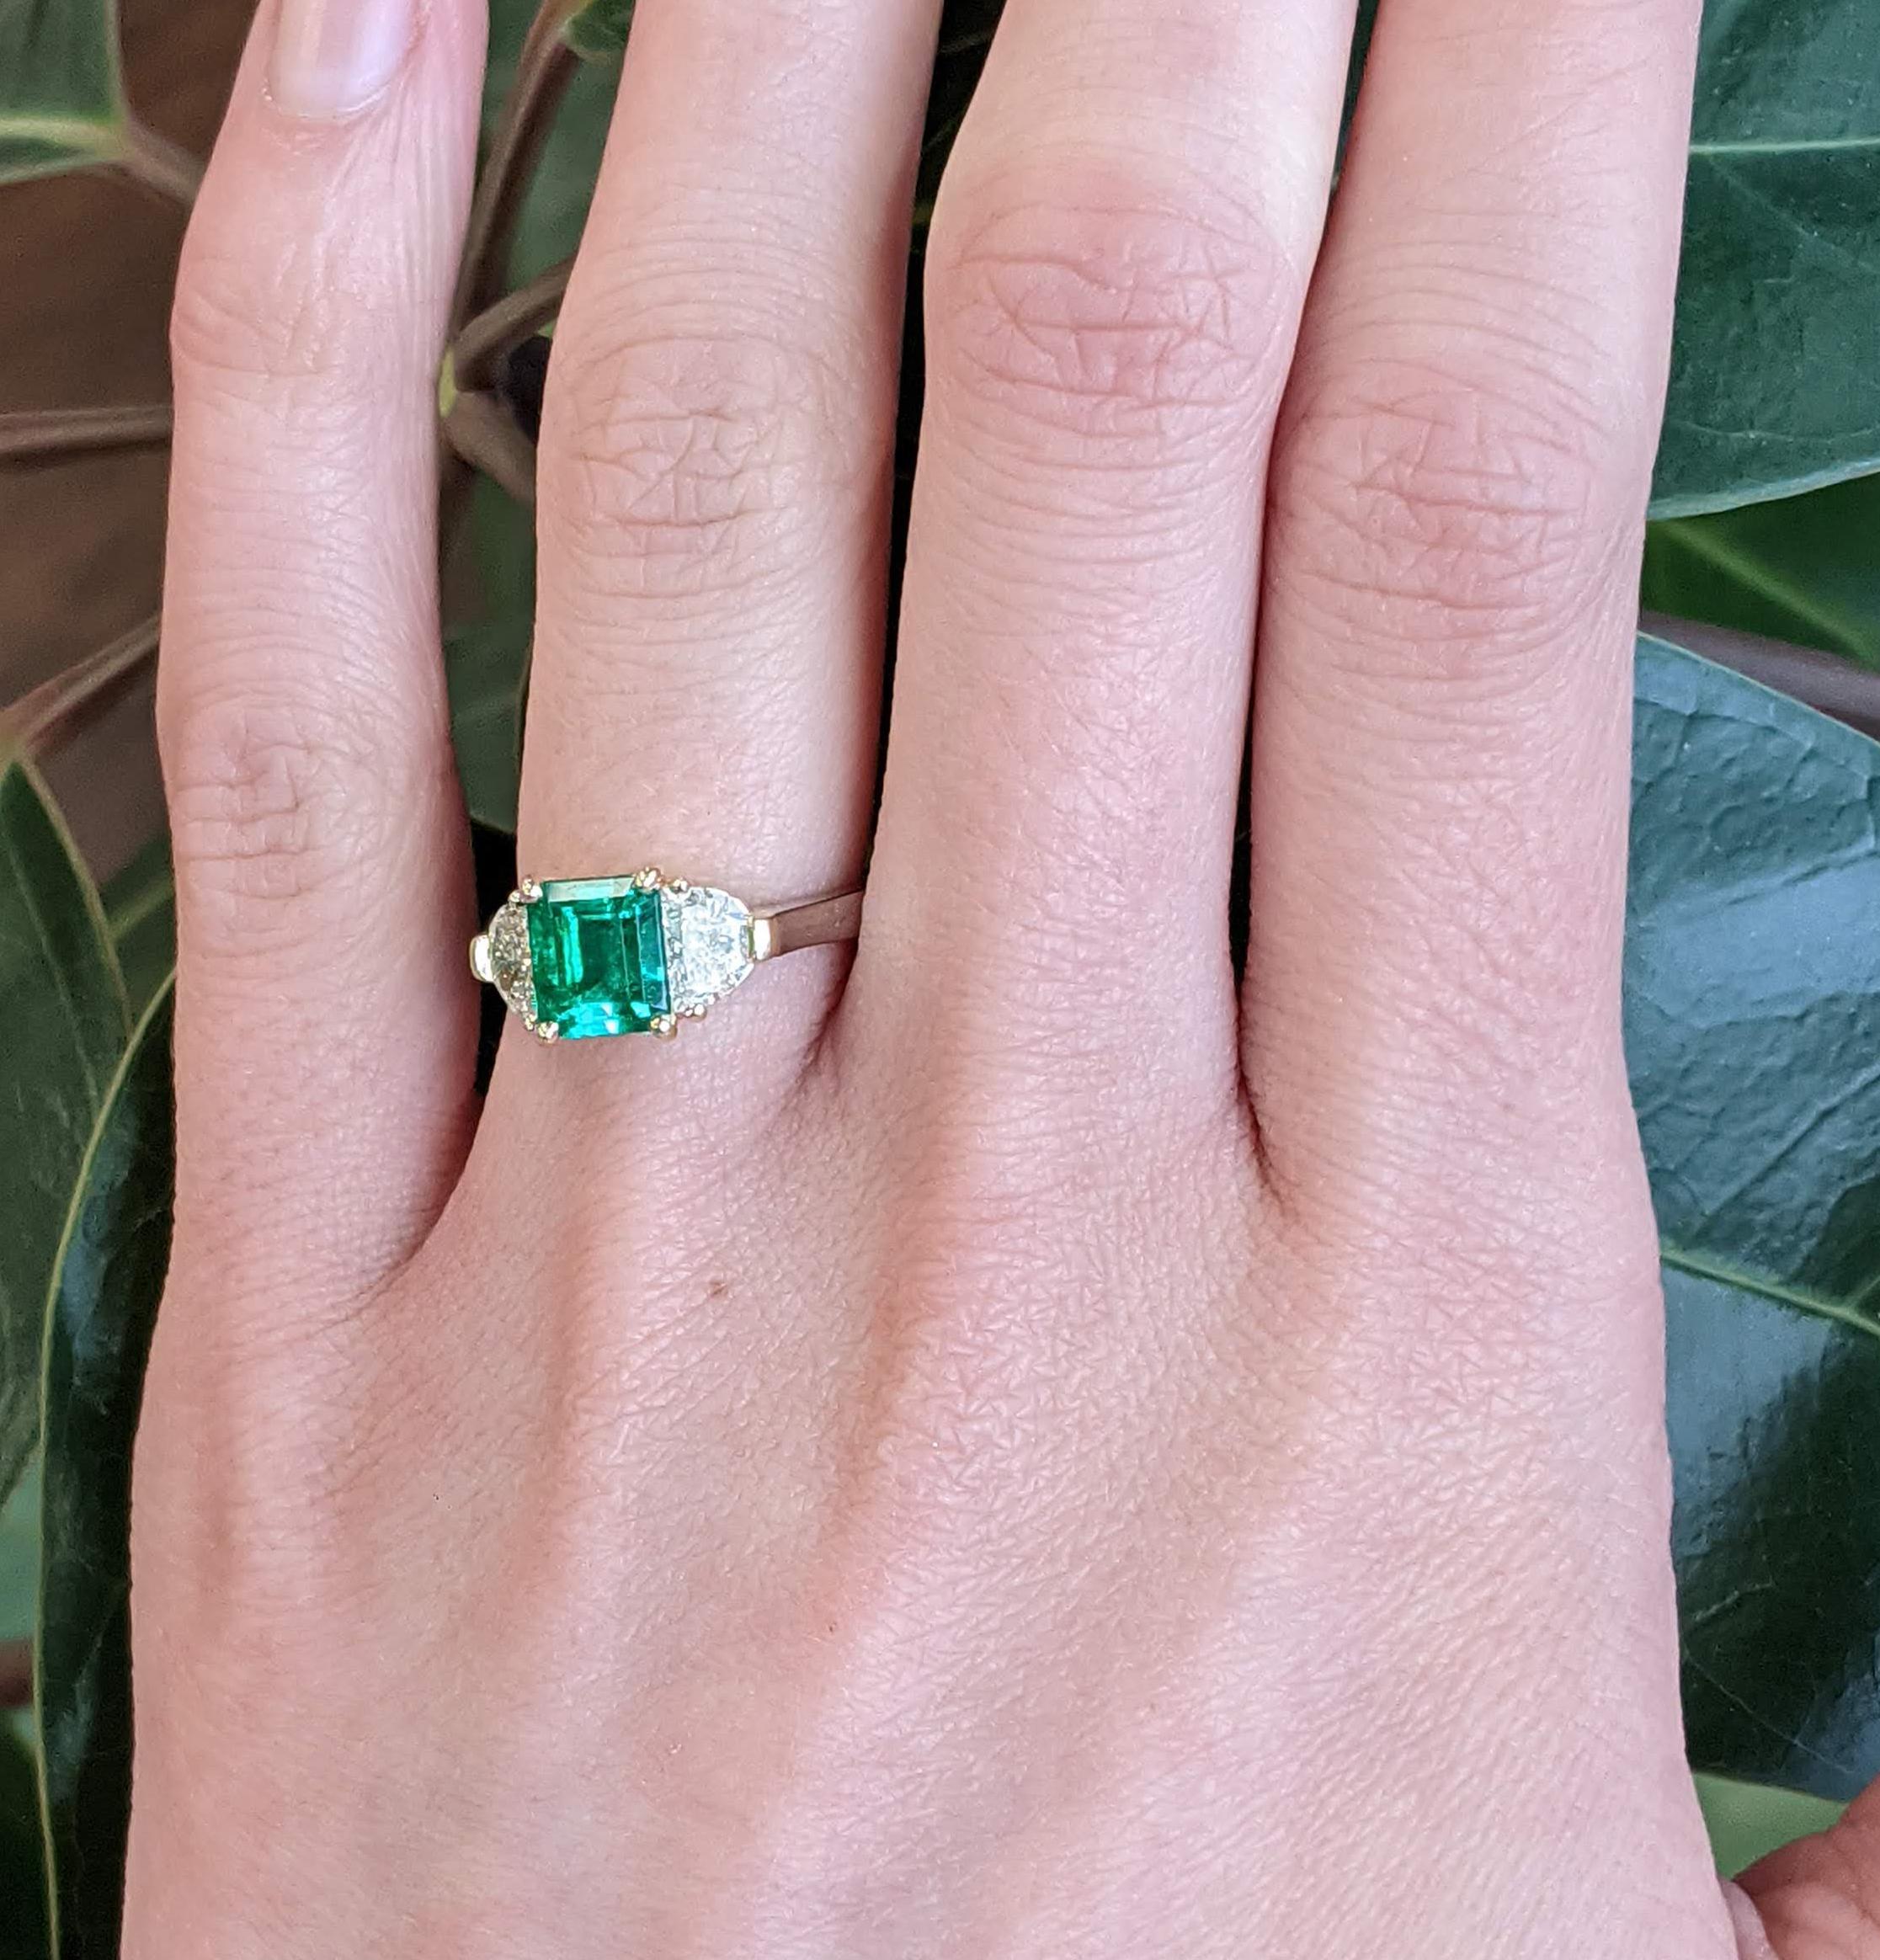 This breathtaking ring is in 18k yellow gold and platinum, boasting a killer deep green emerald center stone flanked by two perfectly matched brilliant white half-moon diamonds. The emerald center is a stunning deep green color and an elegant square